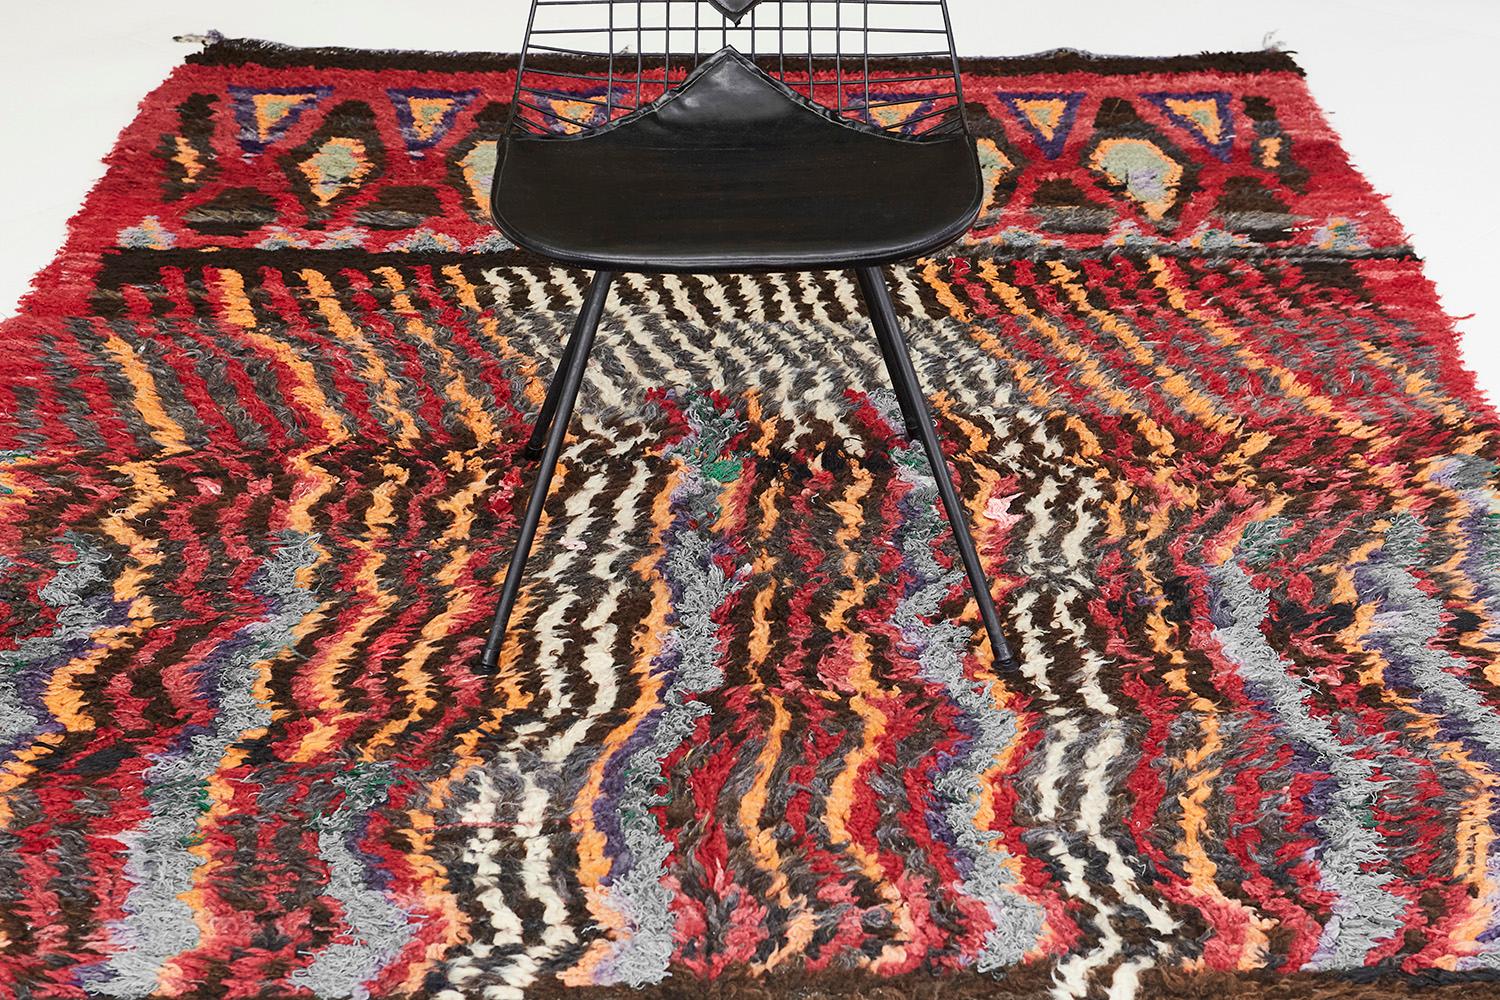 A Vintage Moroccan Beni M’Guild Tribe rug that gives your space a bold and distinctive edge. Featuring the kaleidoscopic effect that gives the viewer sight of illusion upon seeing this fantastic rug. Whimsical yet alluring, this rug will add a sense